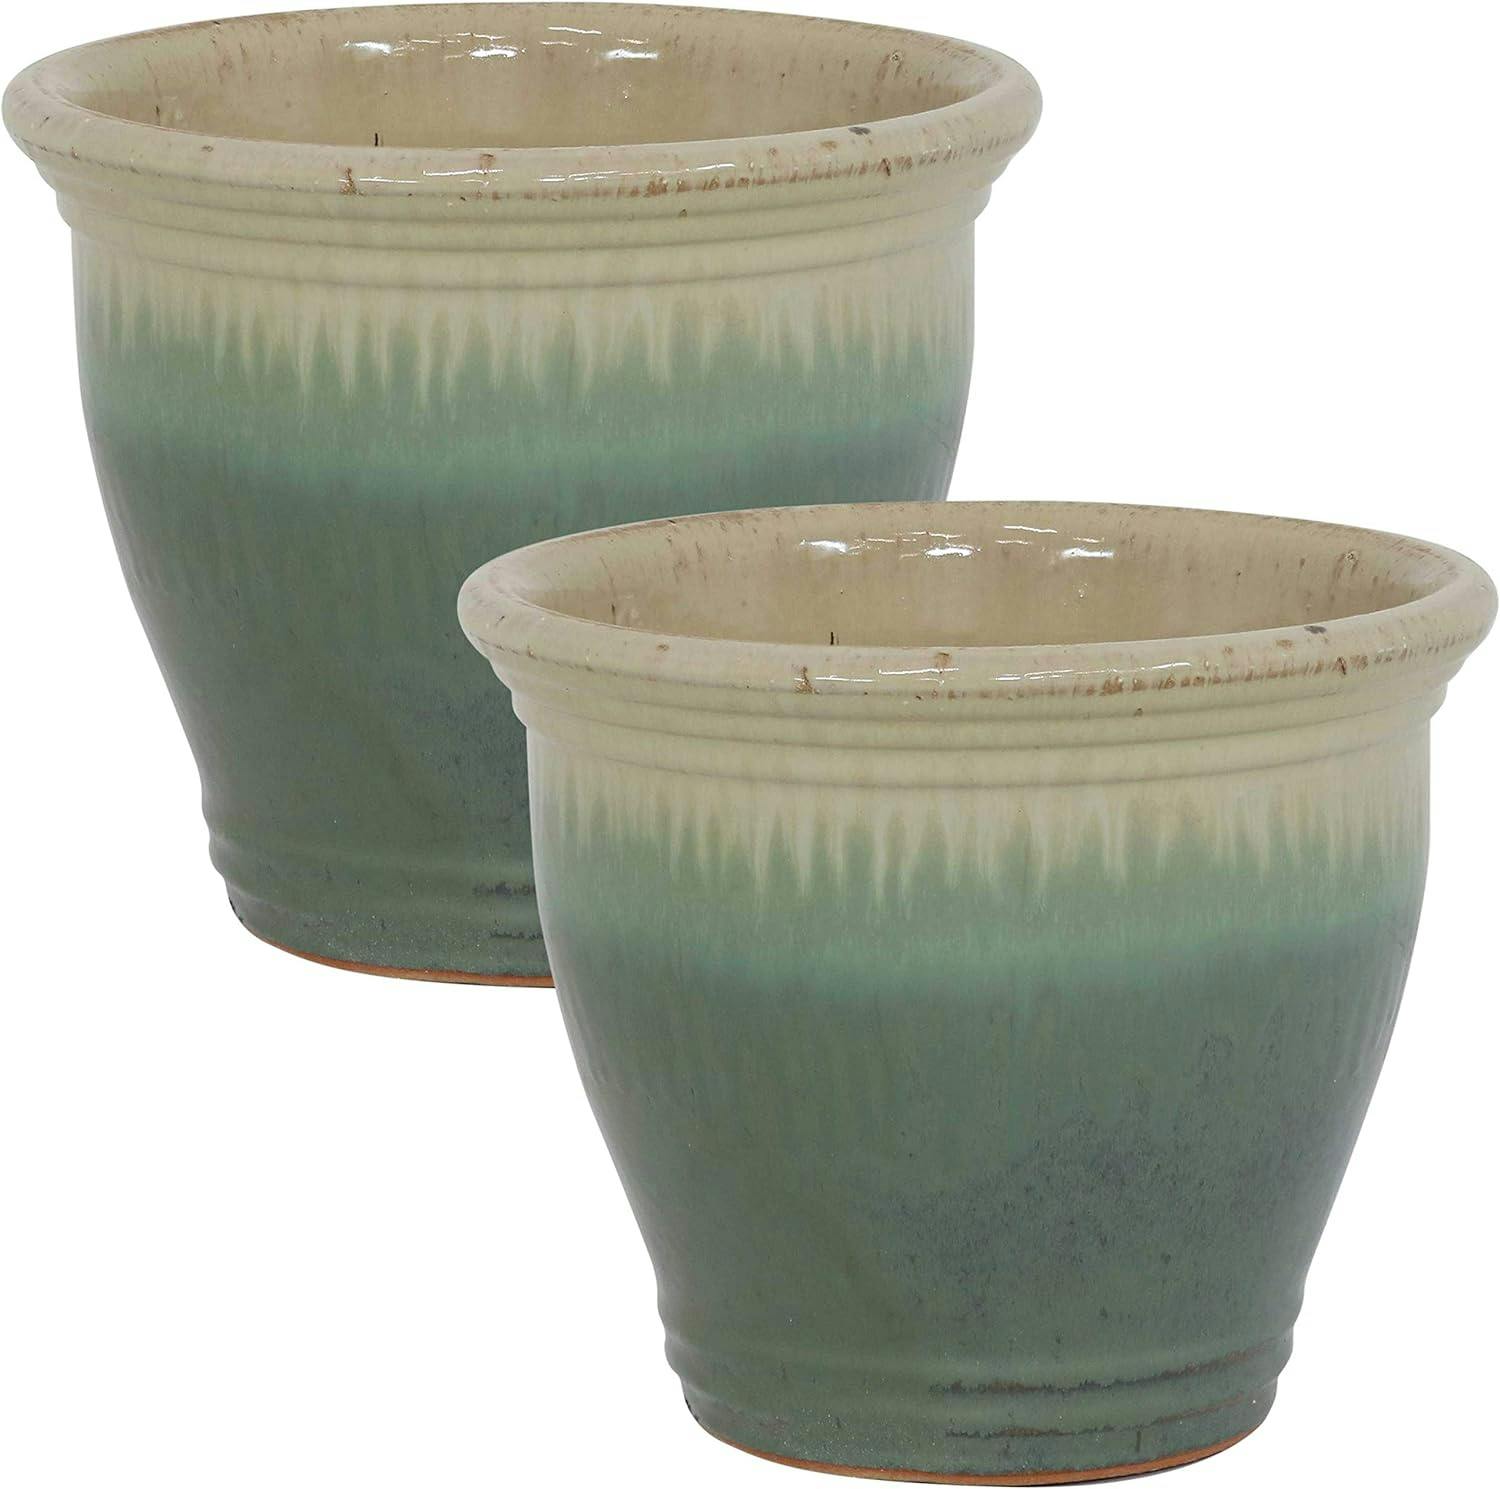 Seafoam High-Fired Glazed Ceramic Planter Duo with Drainage, 11-Inch